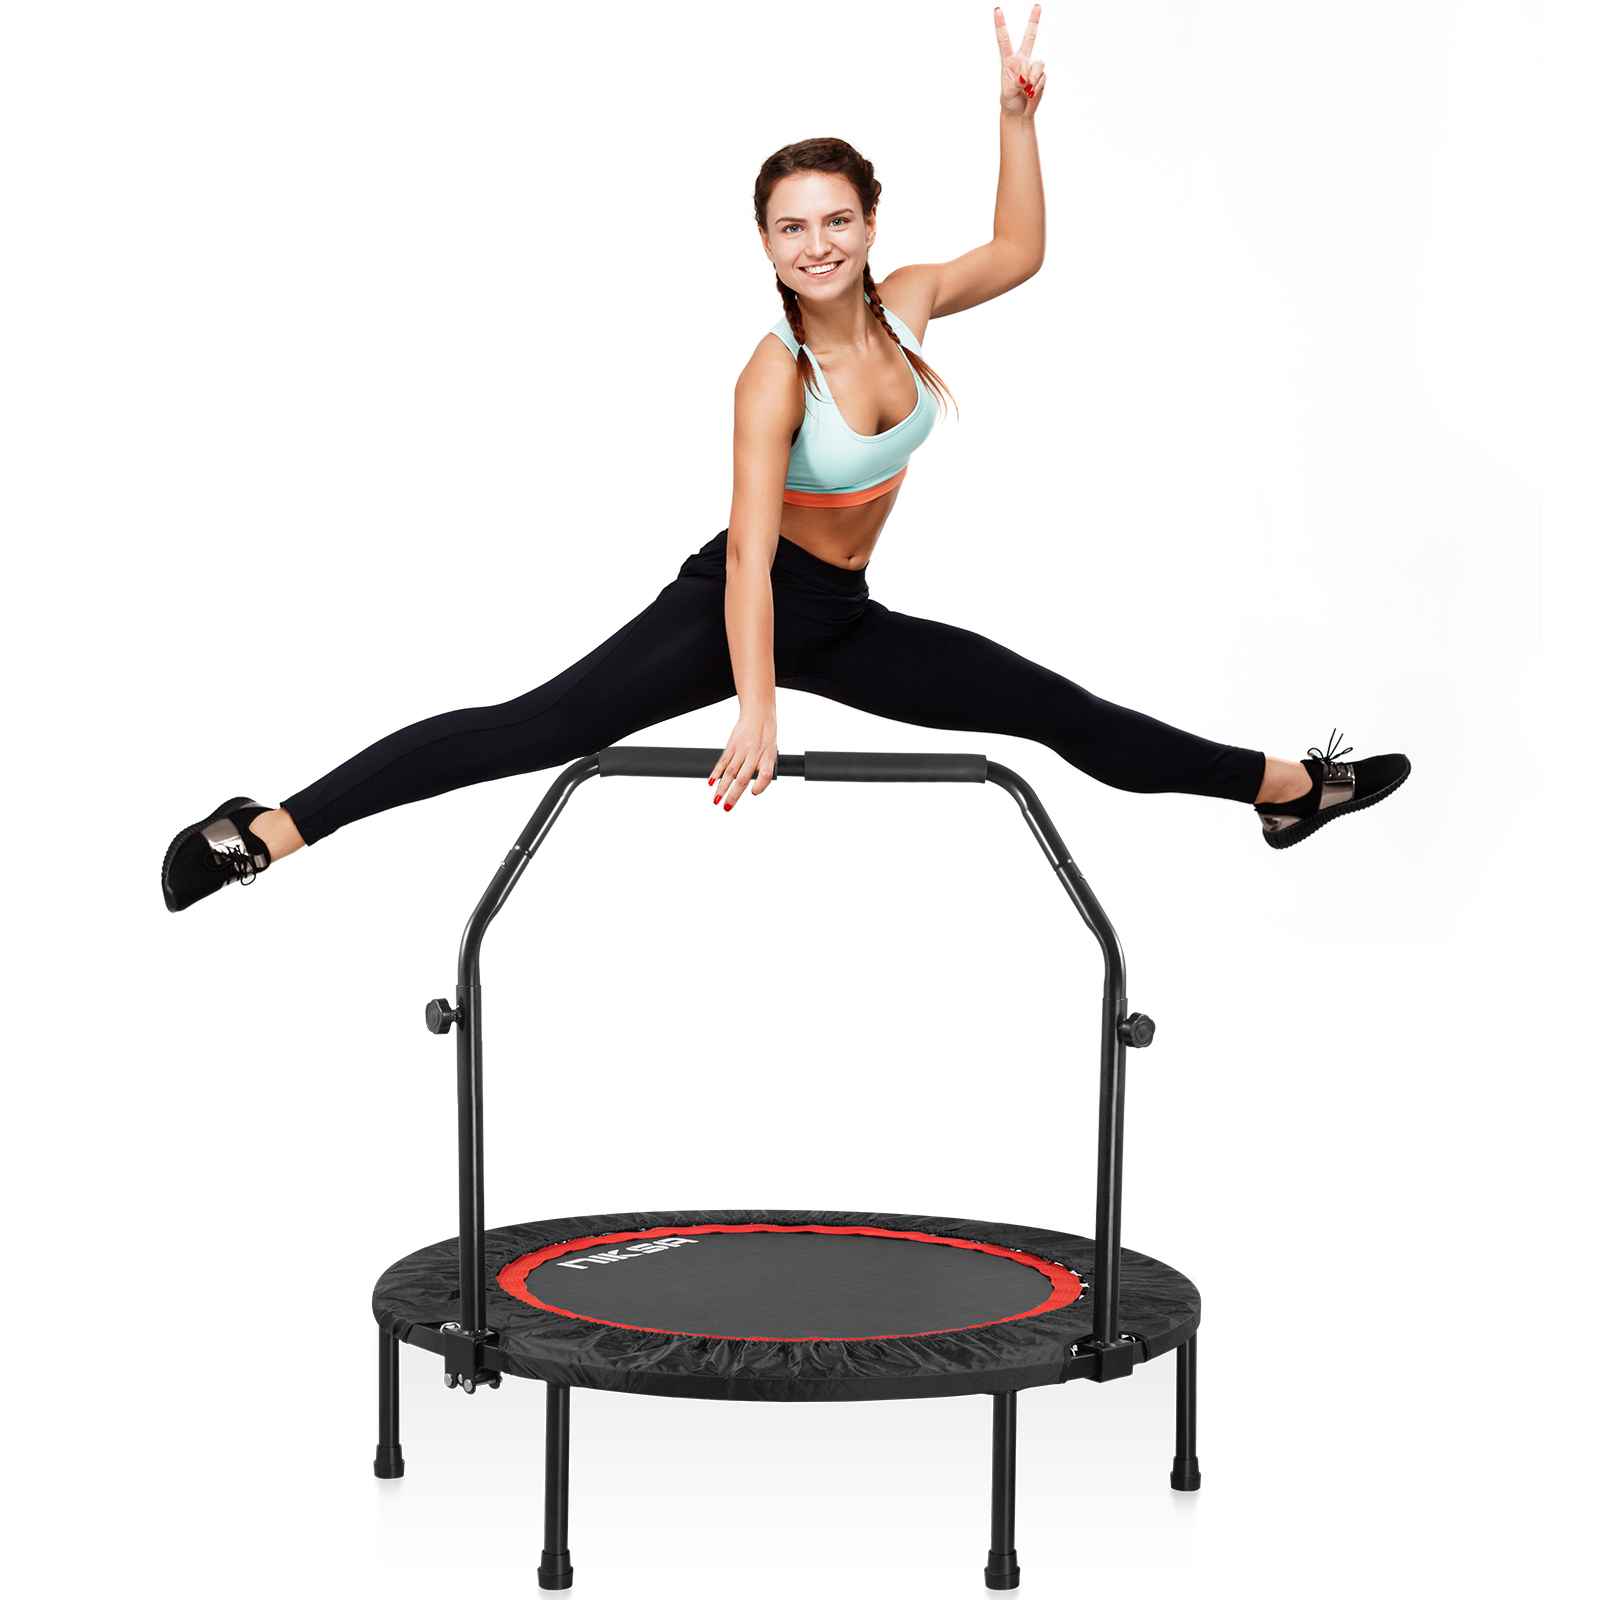 Foldable and Portable Exercise Workout Trampoline | NKSA